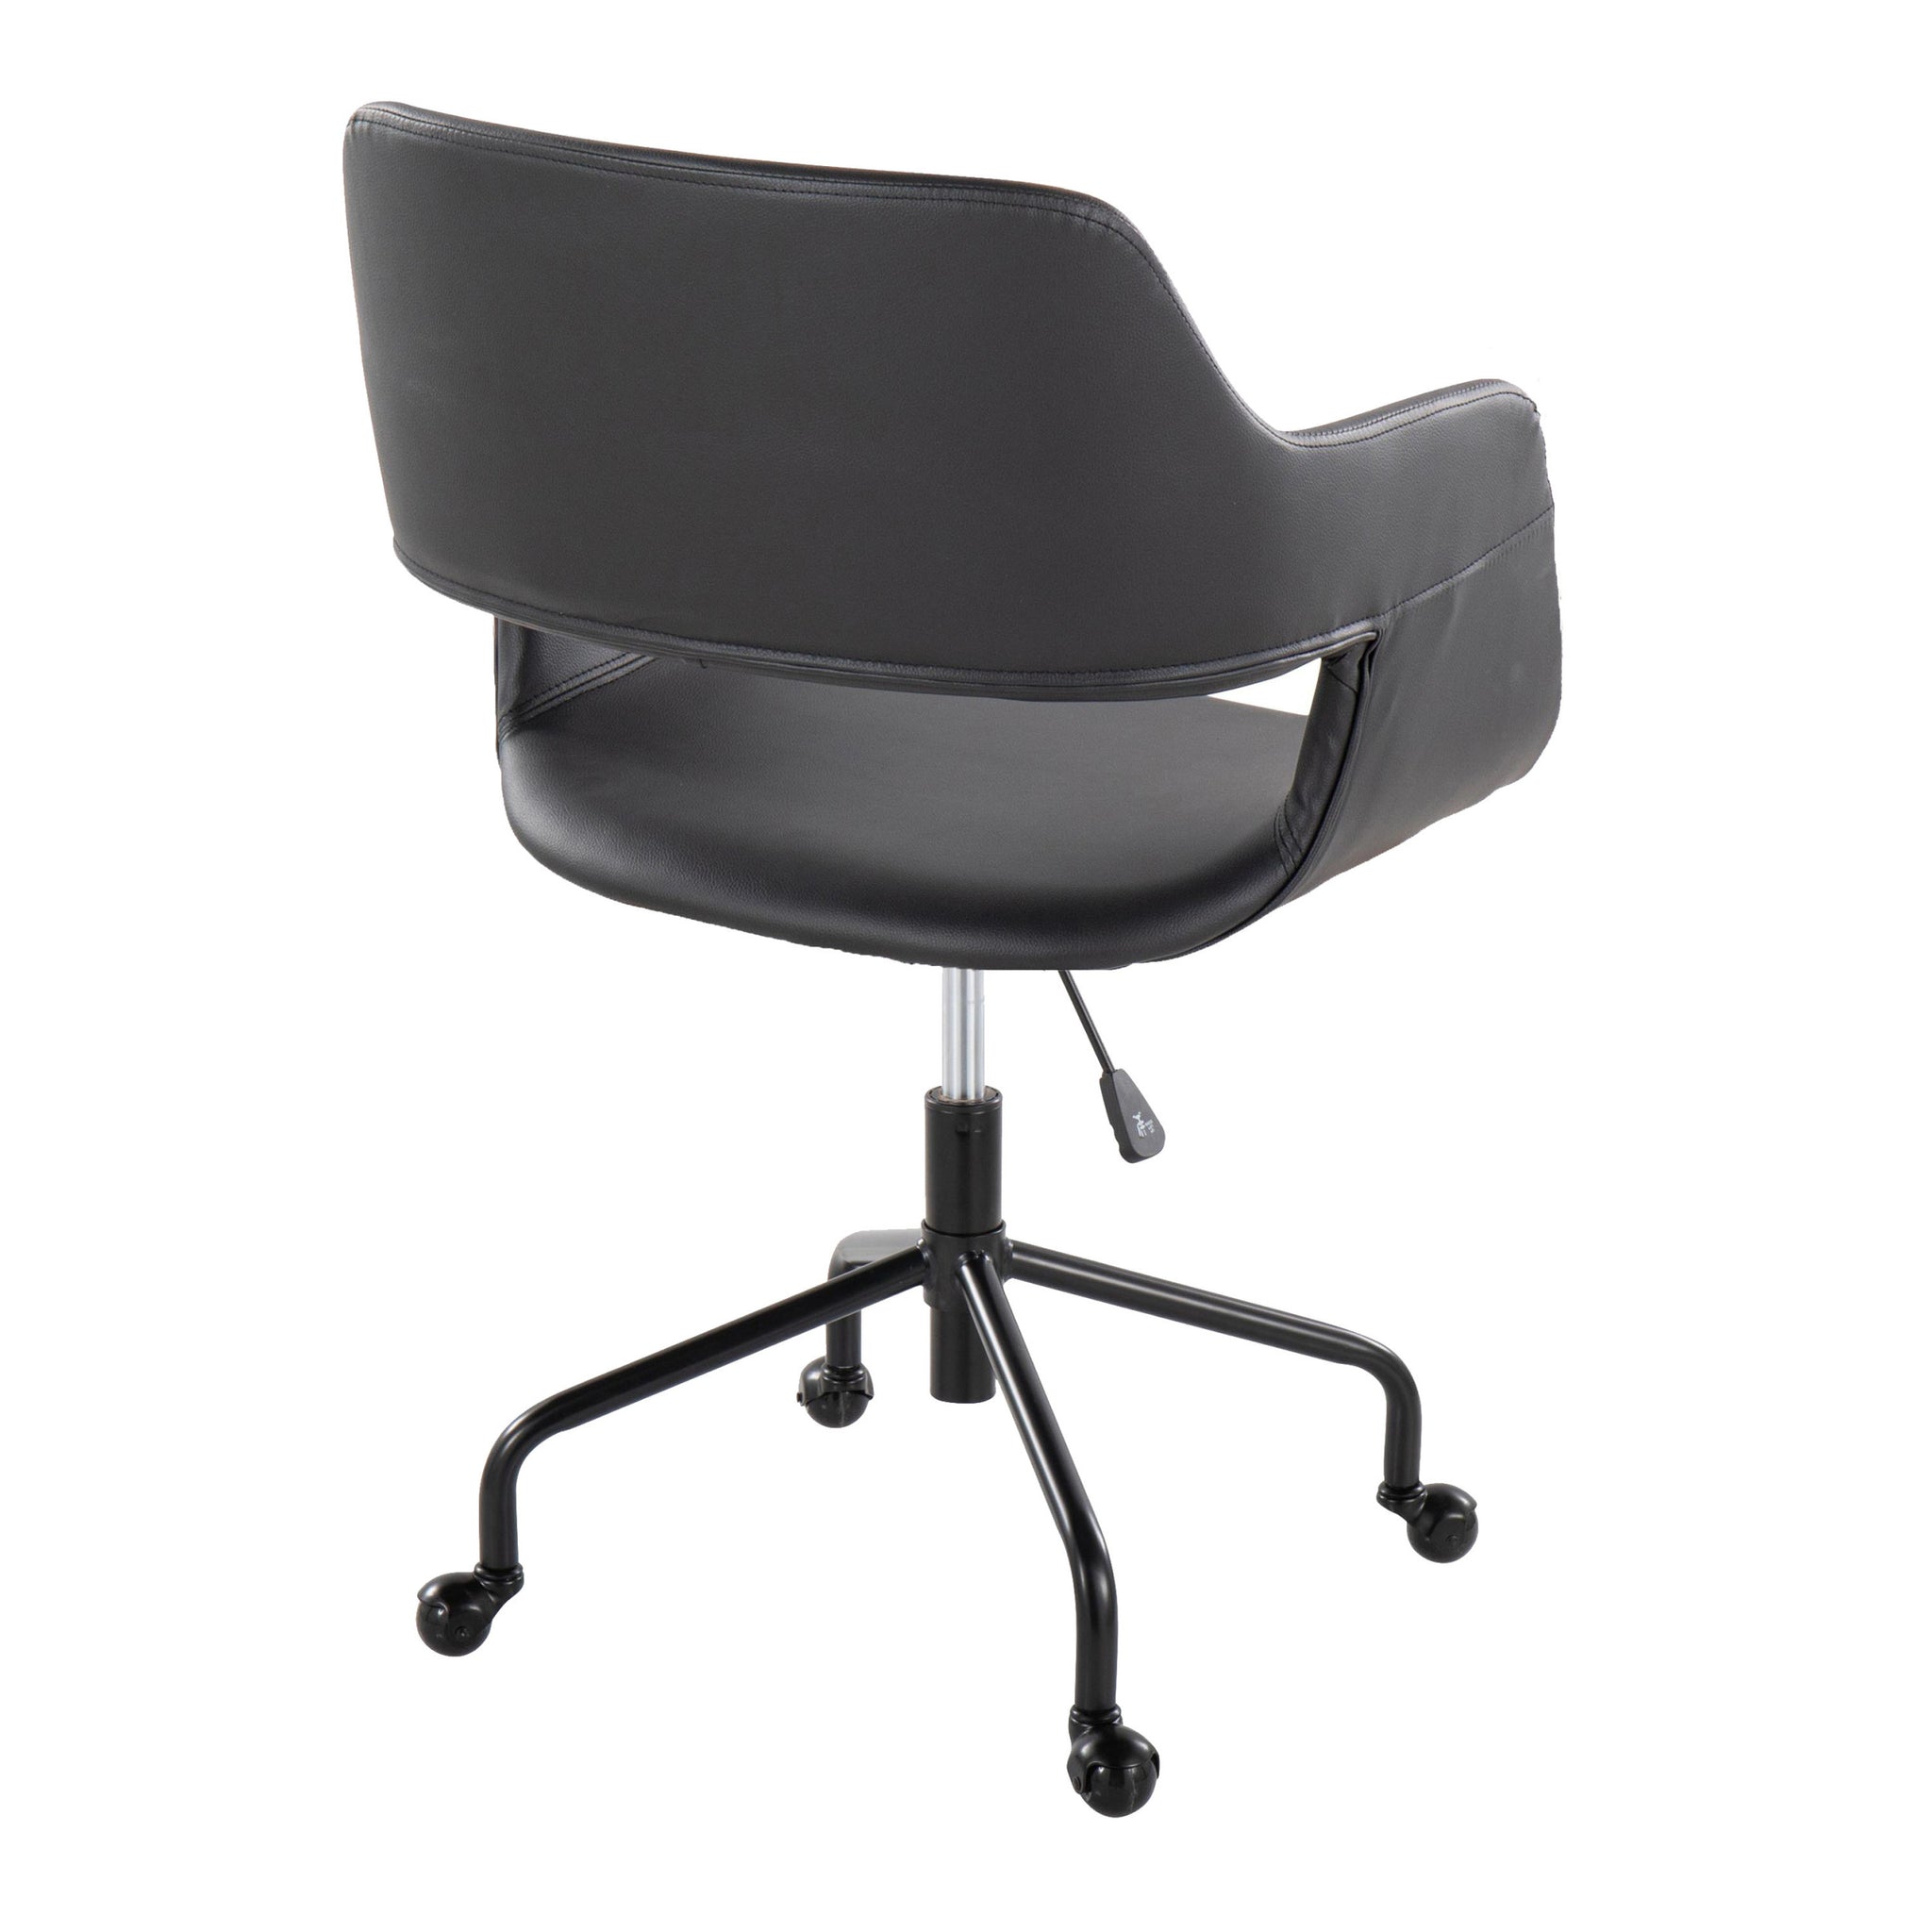 Margarite Contemporary Adjustable Office Chair in black-pu leather